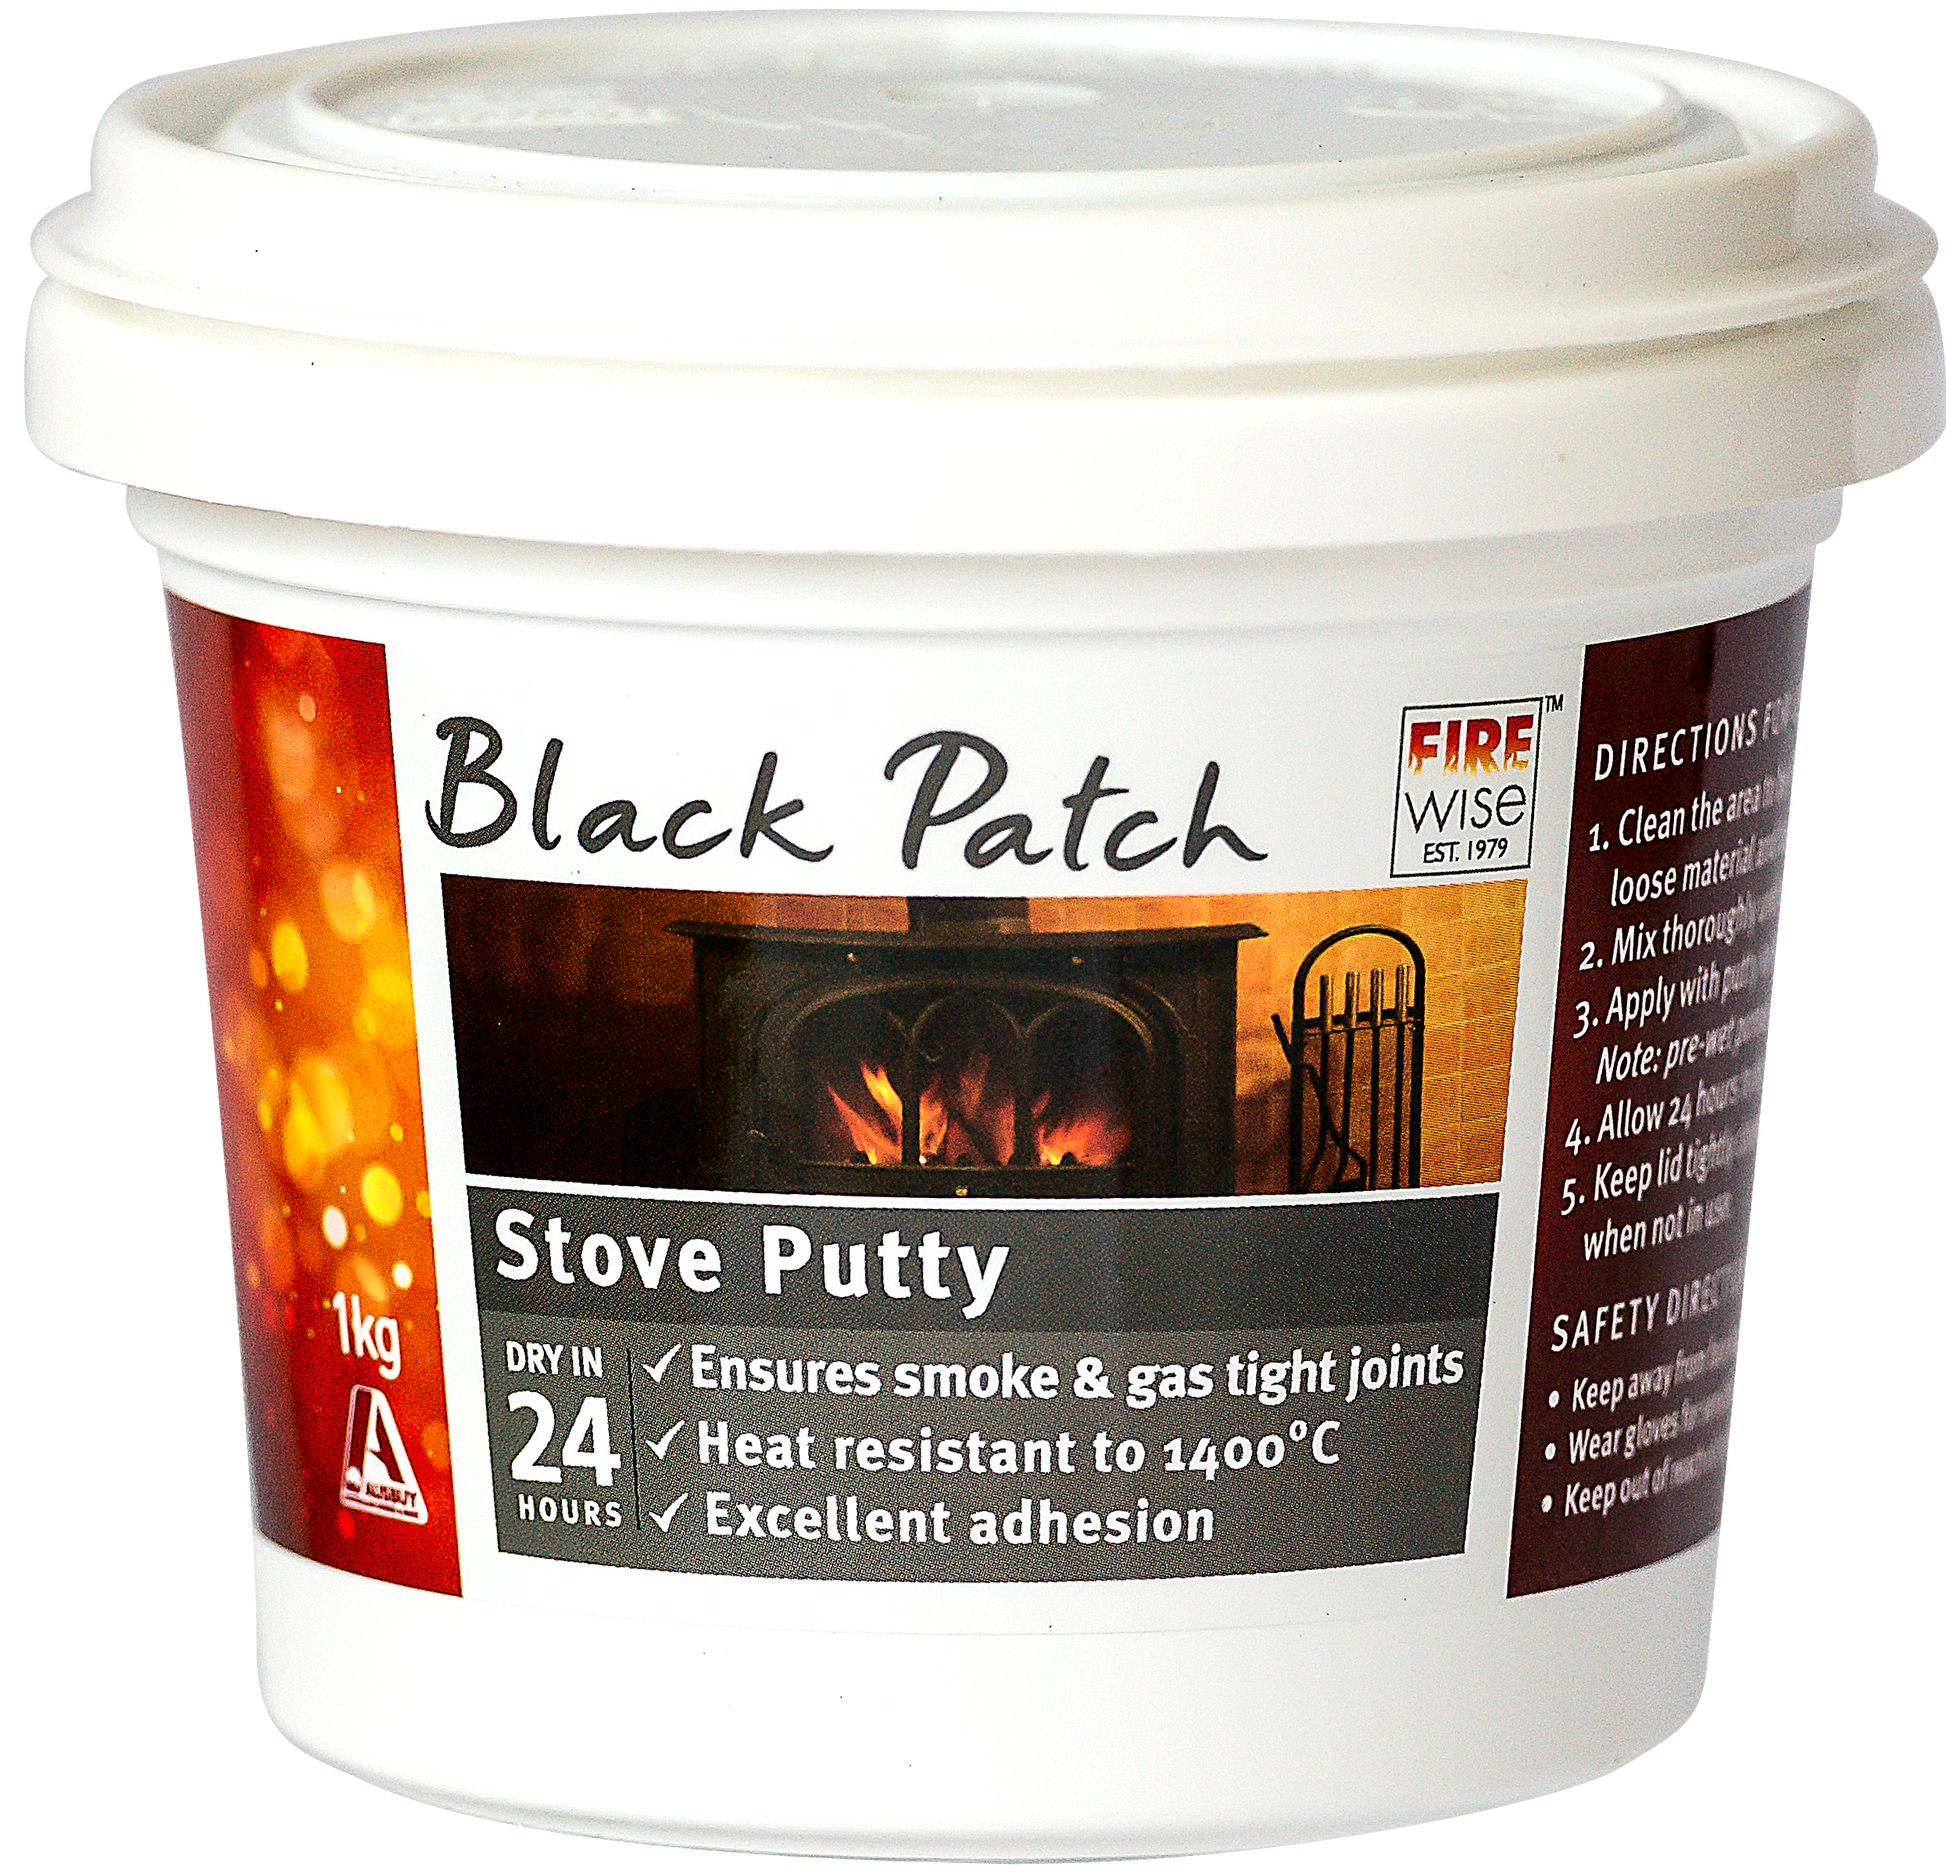 Firewise Black Patch Stove Putty - 500g